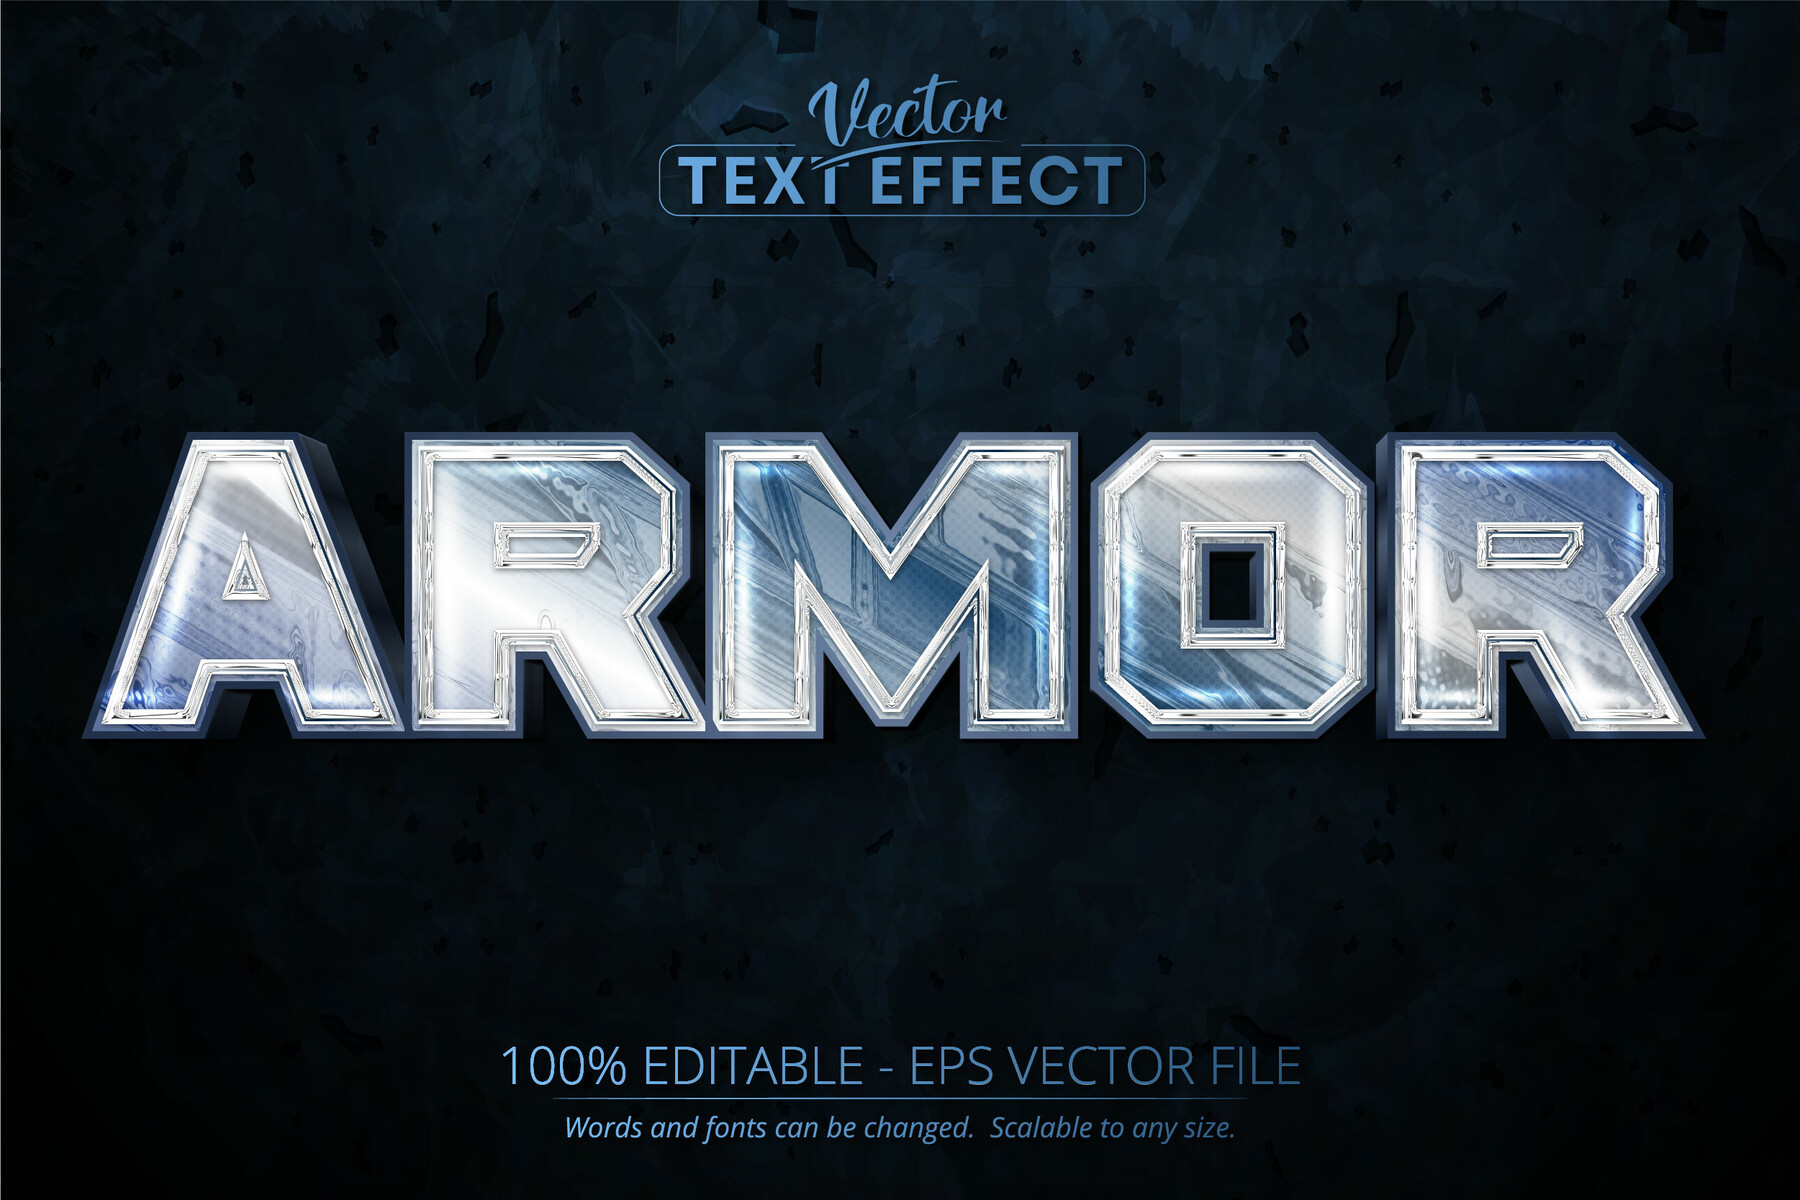 Editor Text Effect and Logo Design Word